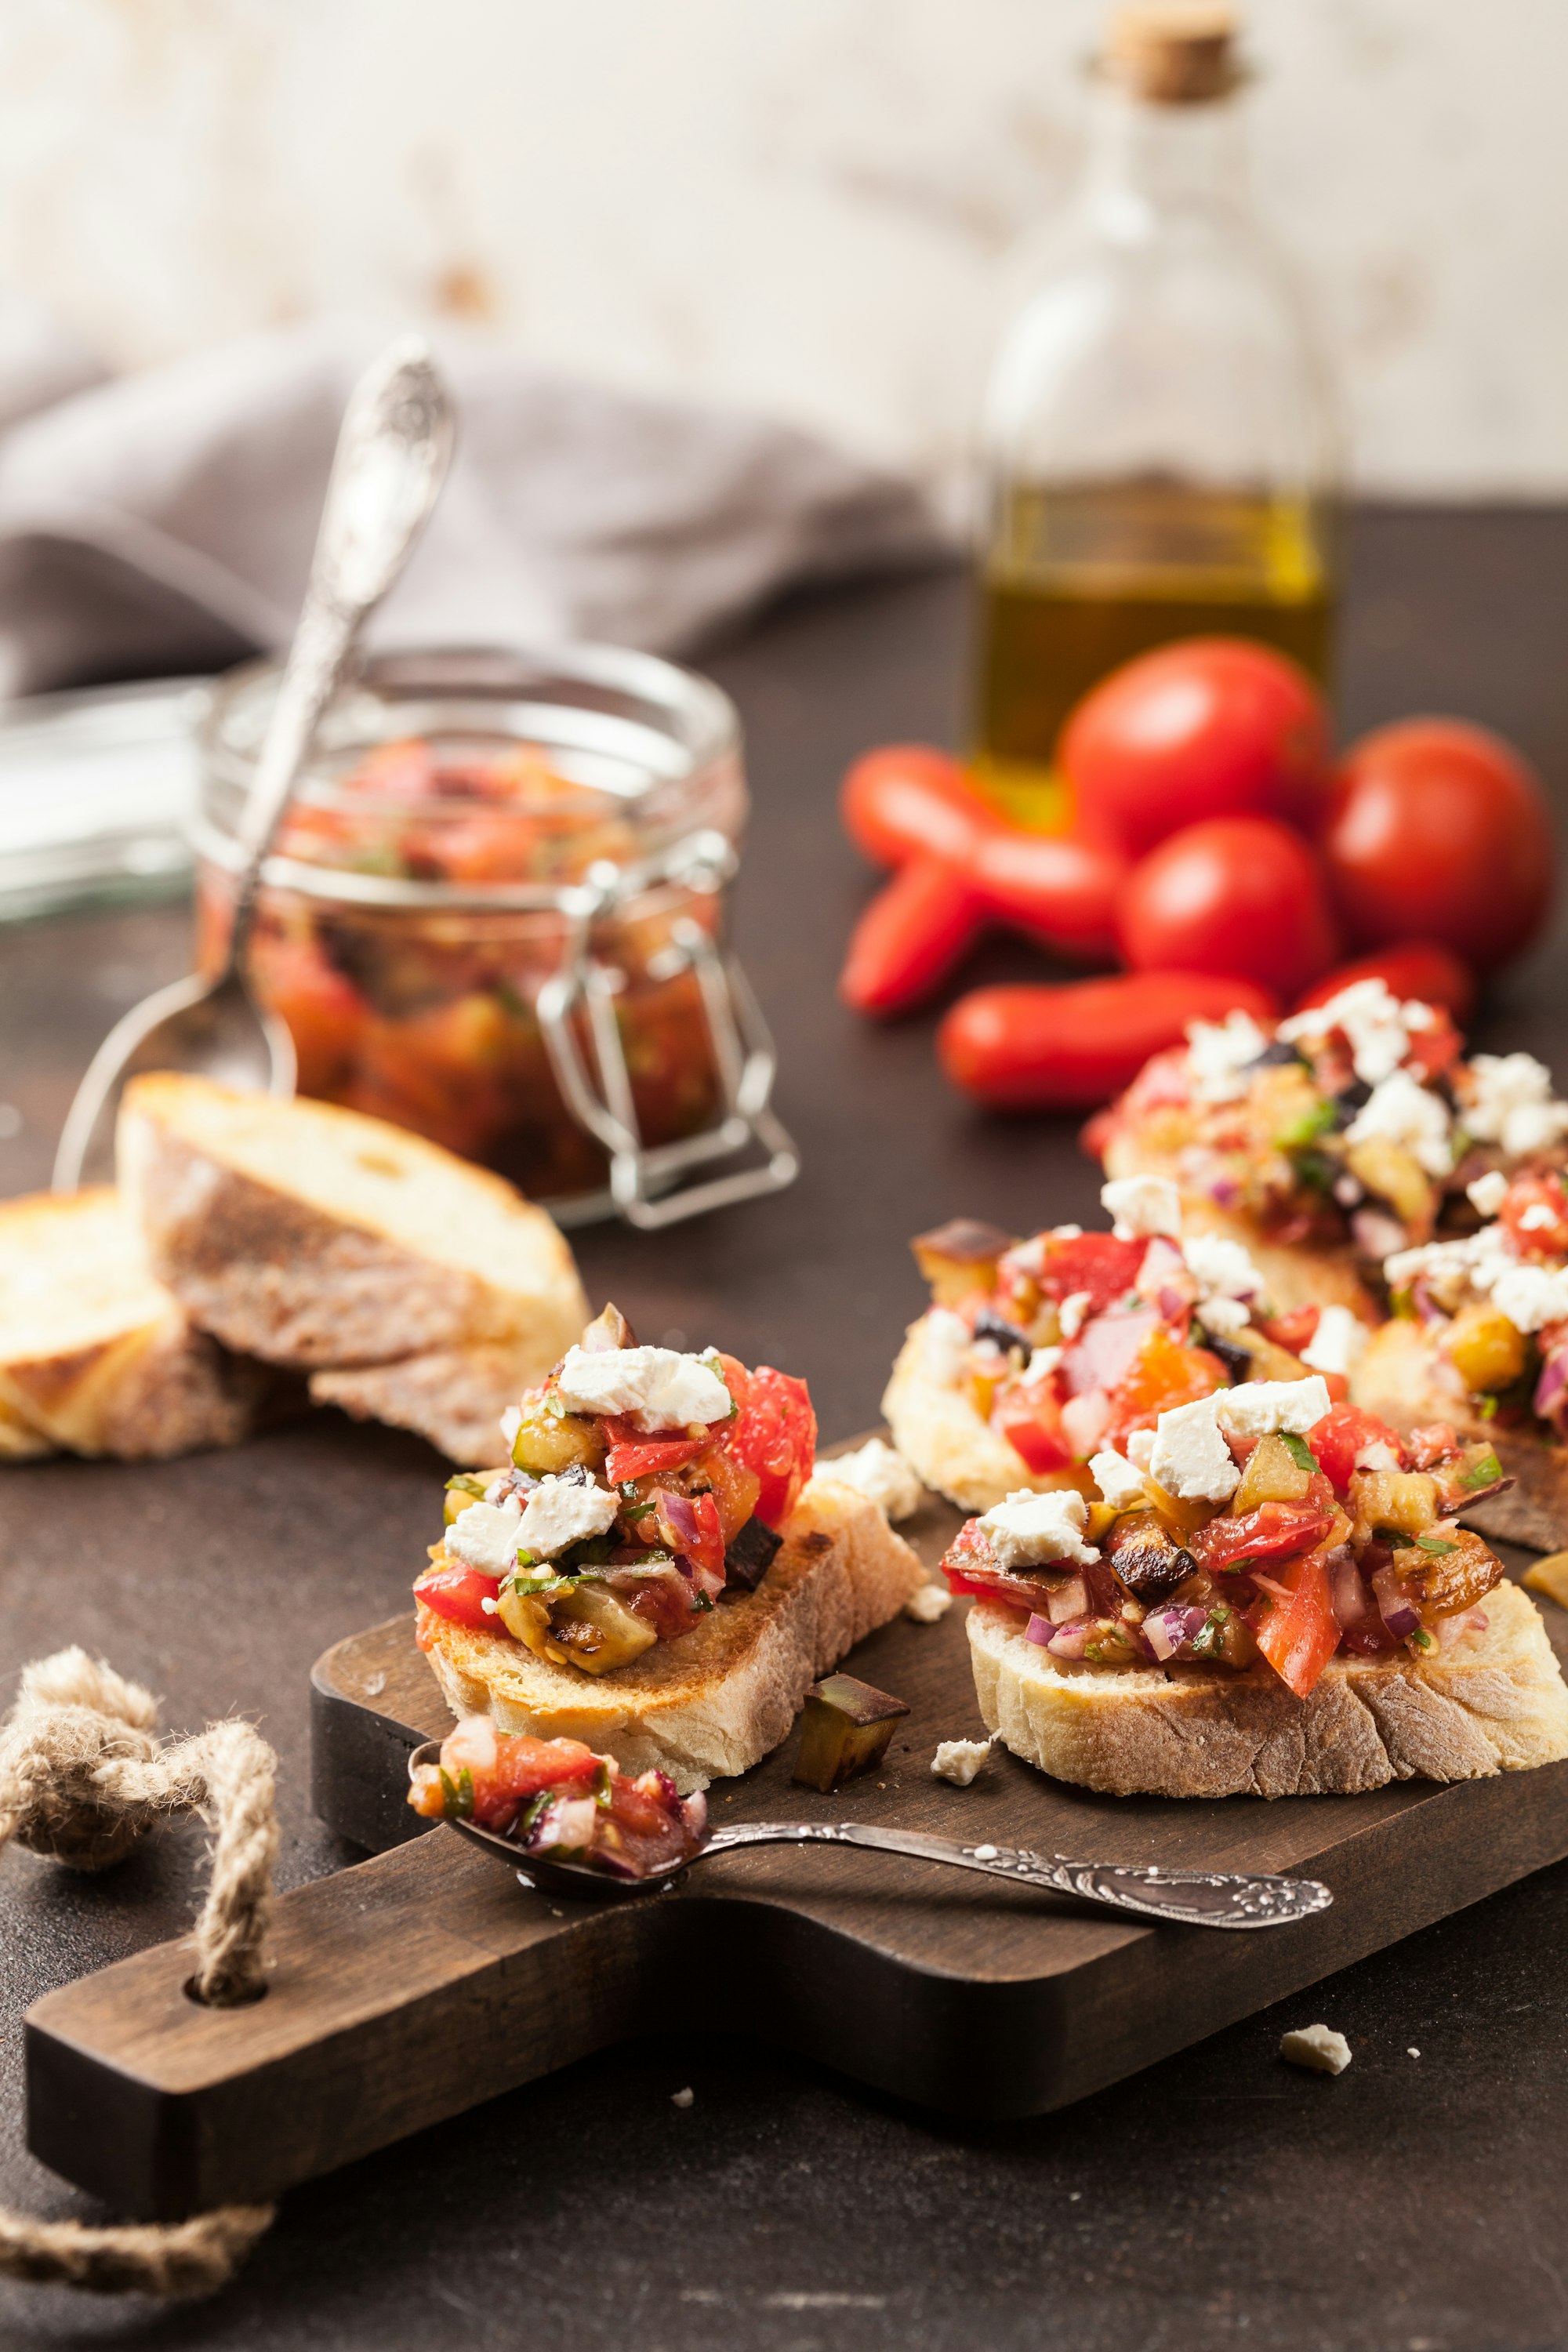 Eggplant and tomato bruschetta with goat cheese